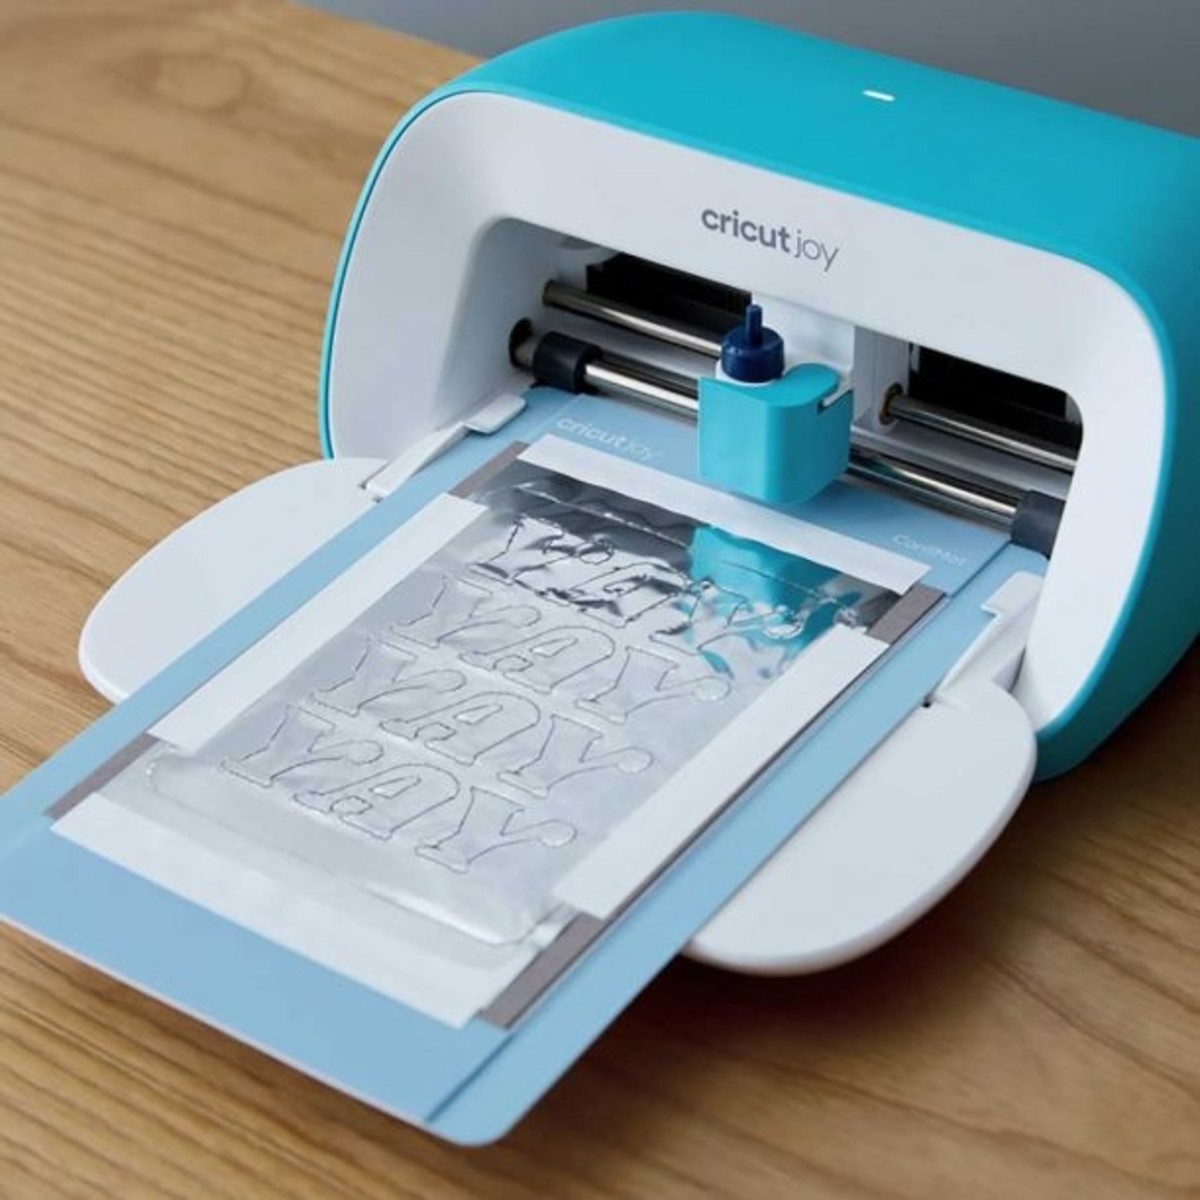 The Cricut Joy has its own Foil Transfer Kit to fit the size of the machine.